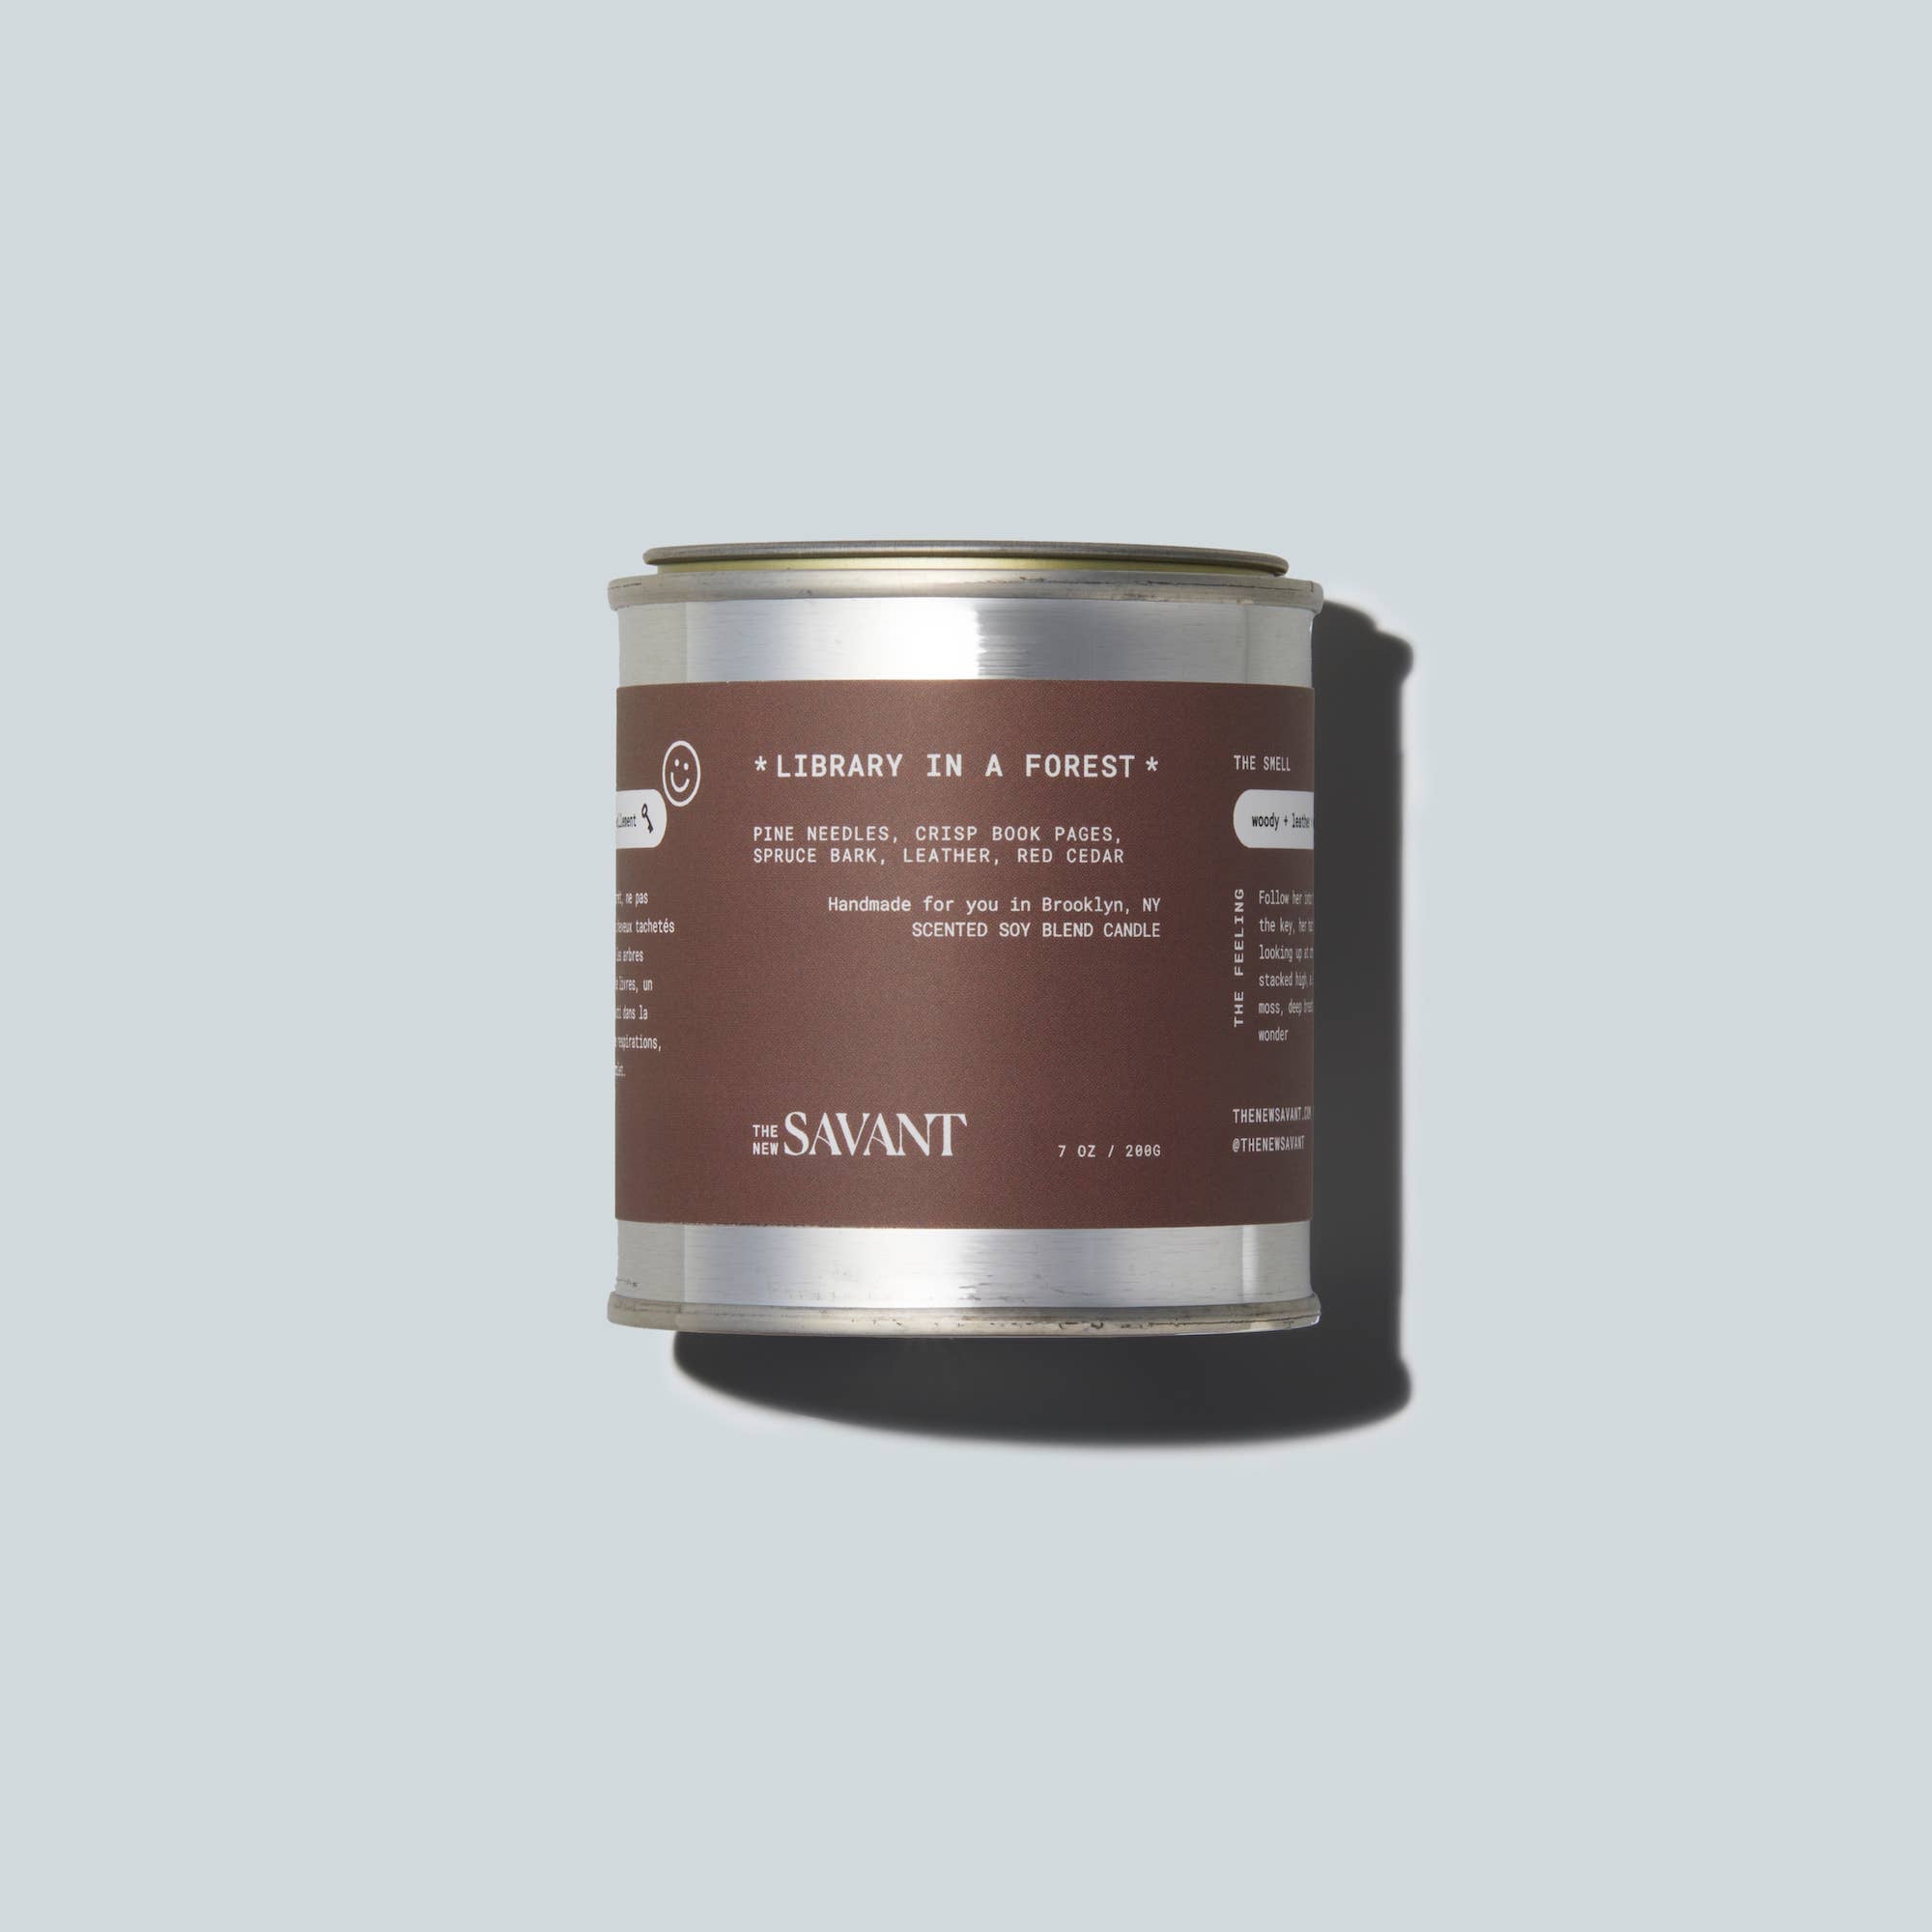 "Library in a Forest" Candle - The New Savant